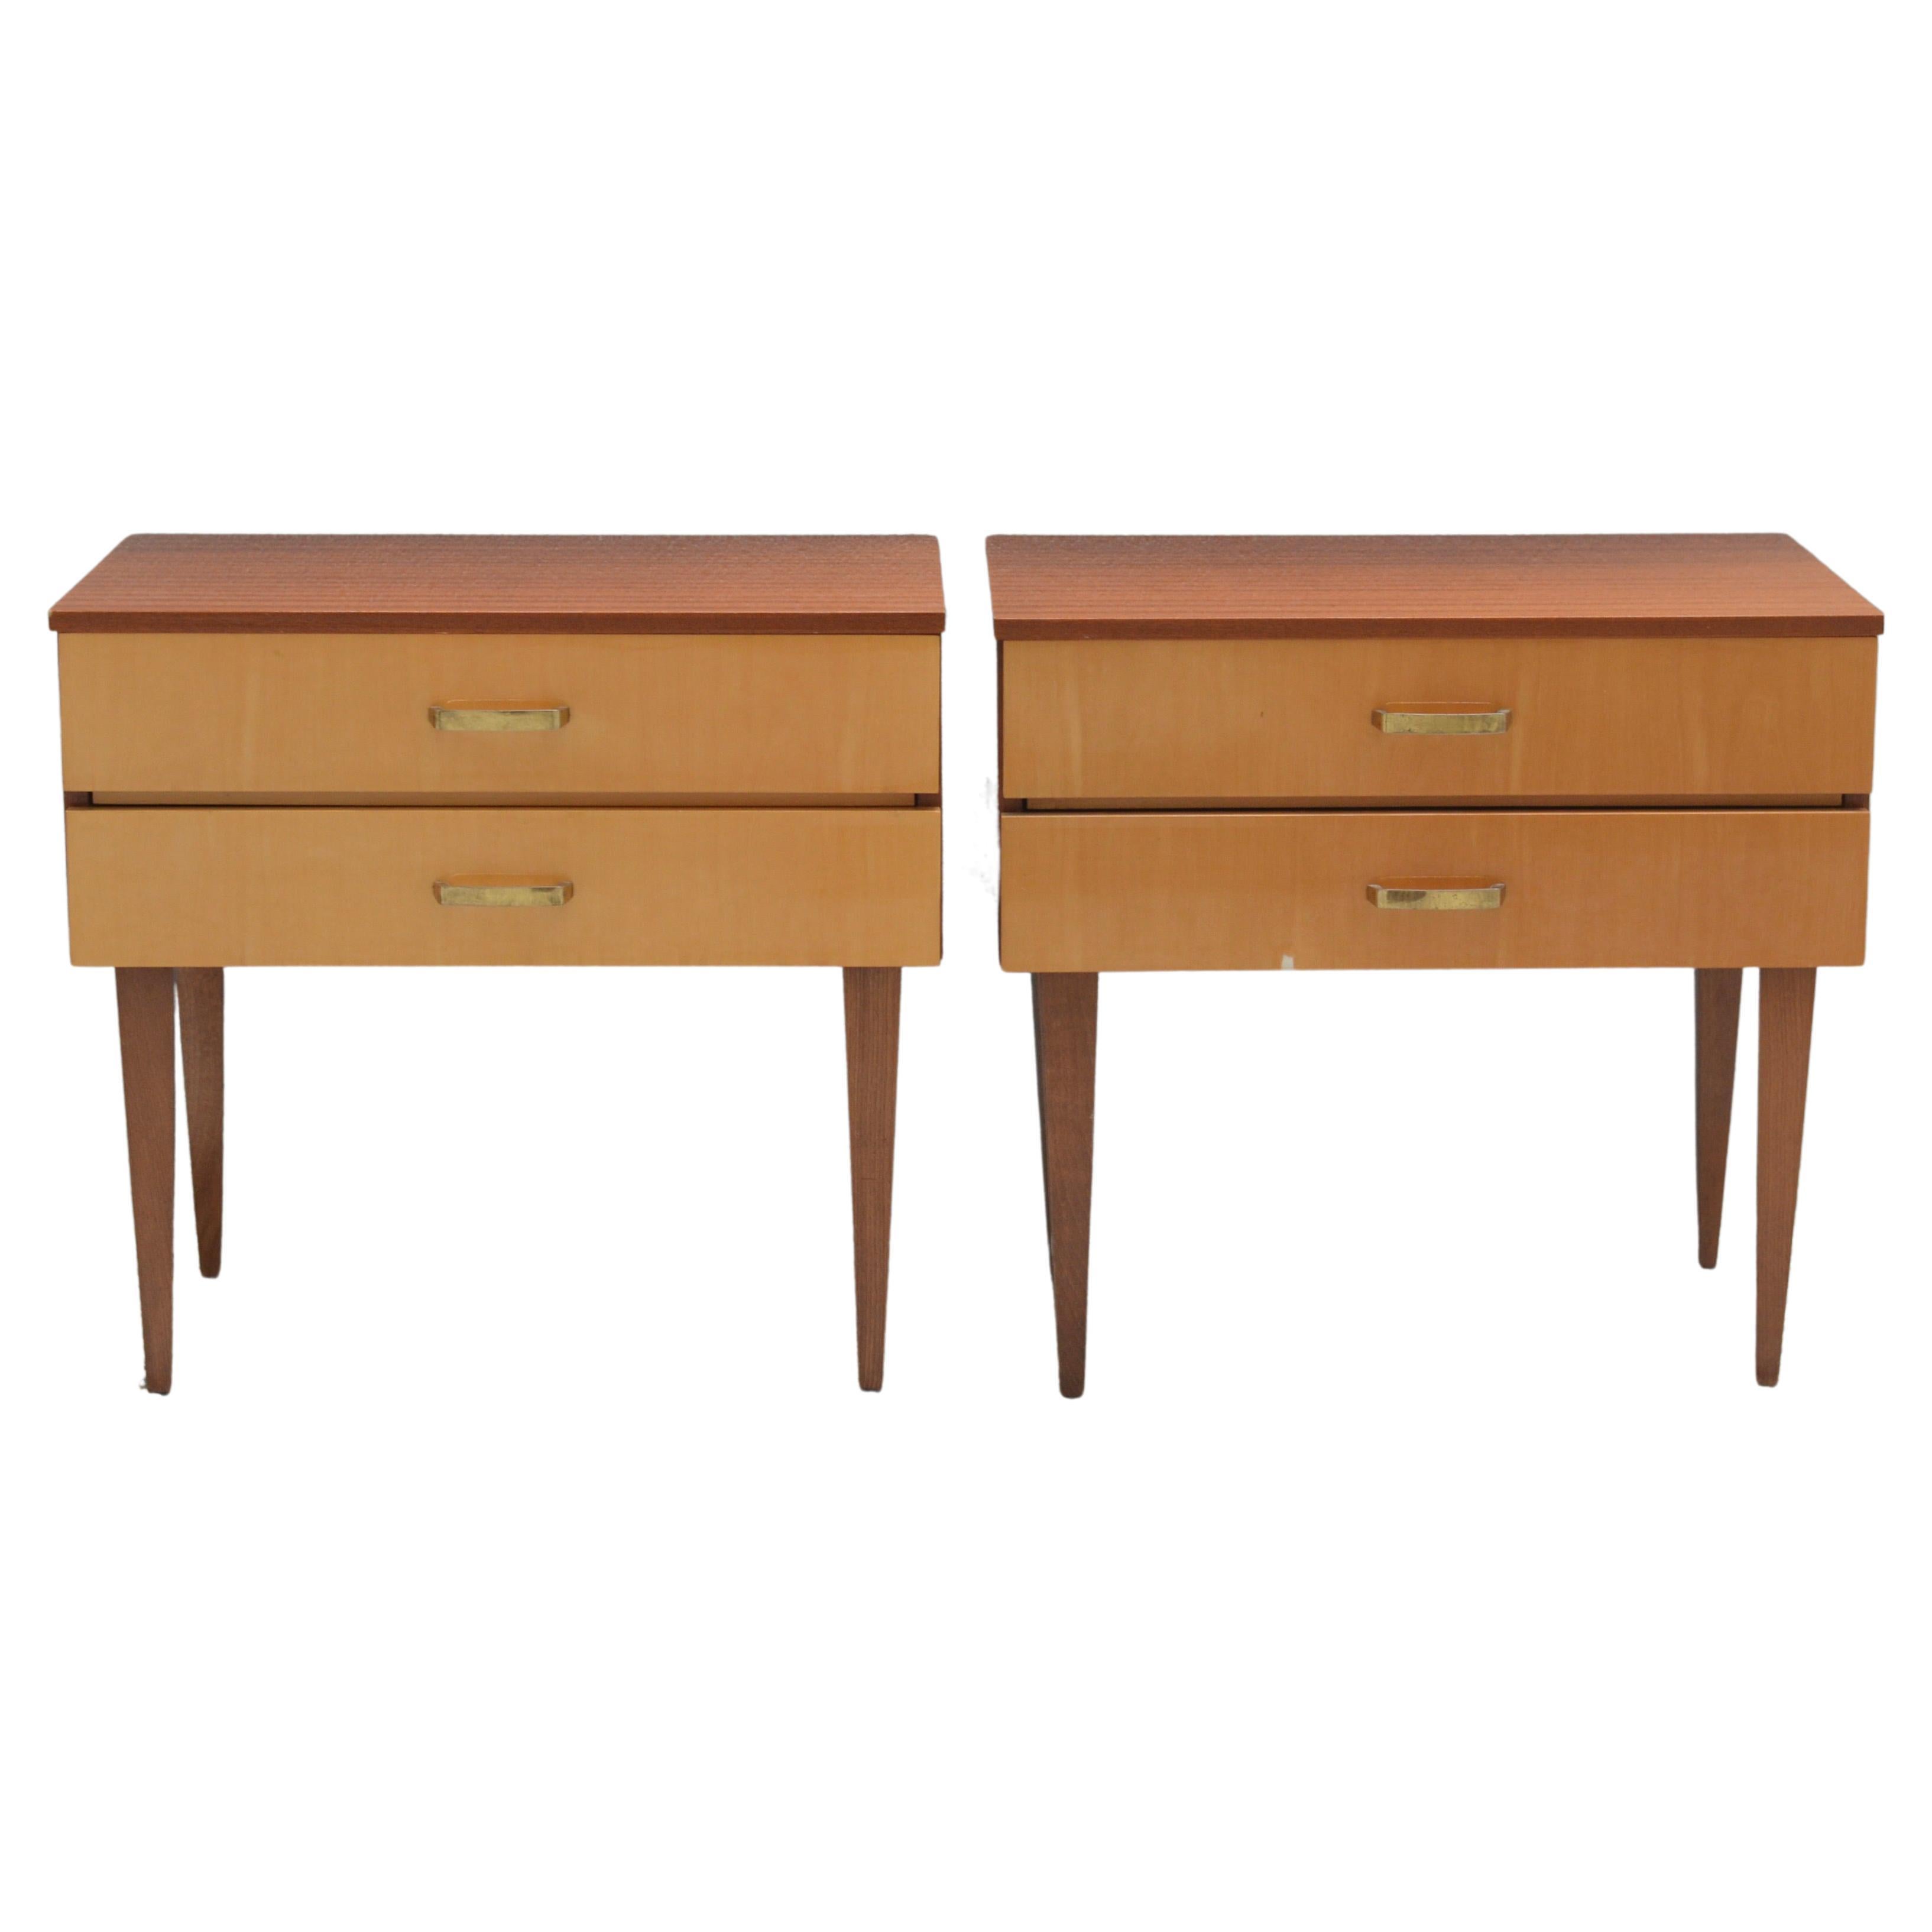 Bedside Table / Nightstand, Pair 1970s